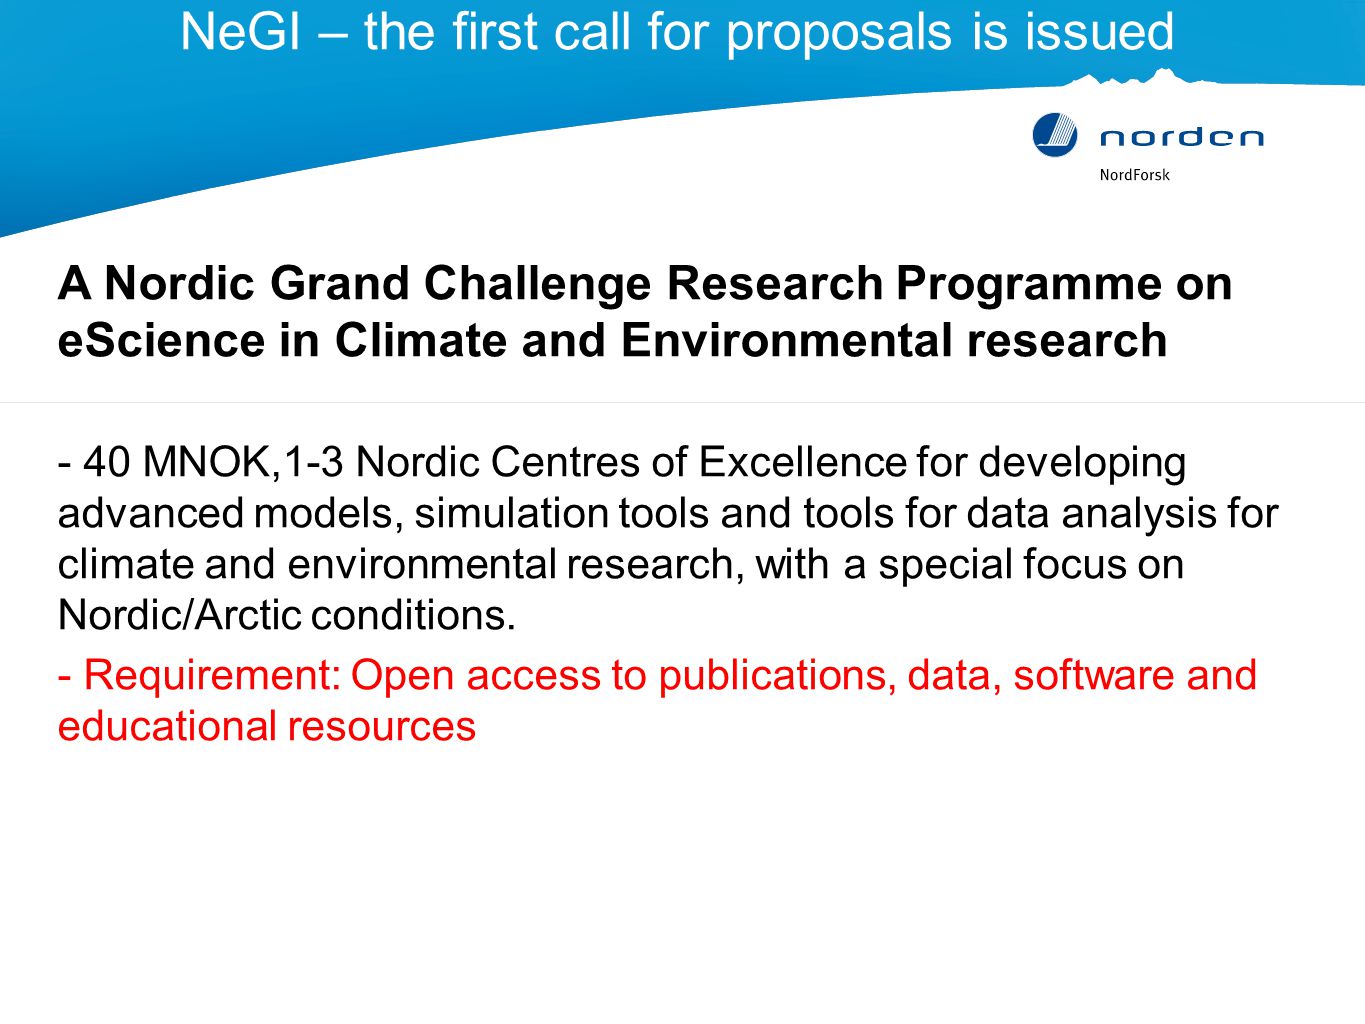 NeGI – the first call for proposals is issued A Nordic Grand Challenge Research Programme on eScience in Climate and Environmental research - 40 MNOK,1-3 Nordic Centres of Excellence for developing advanced models, simulation tools and tools for data analysis for climate and environmental research, with a special focus on Nordic/Arctic conditions.